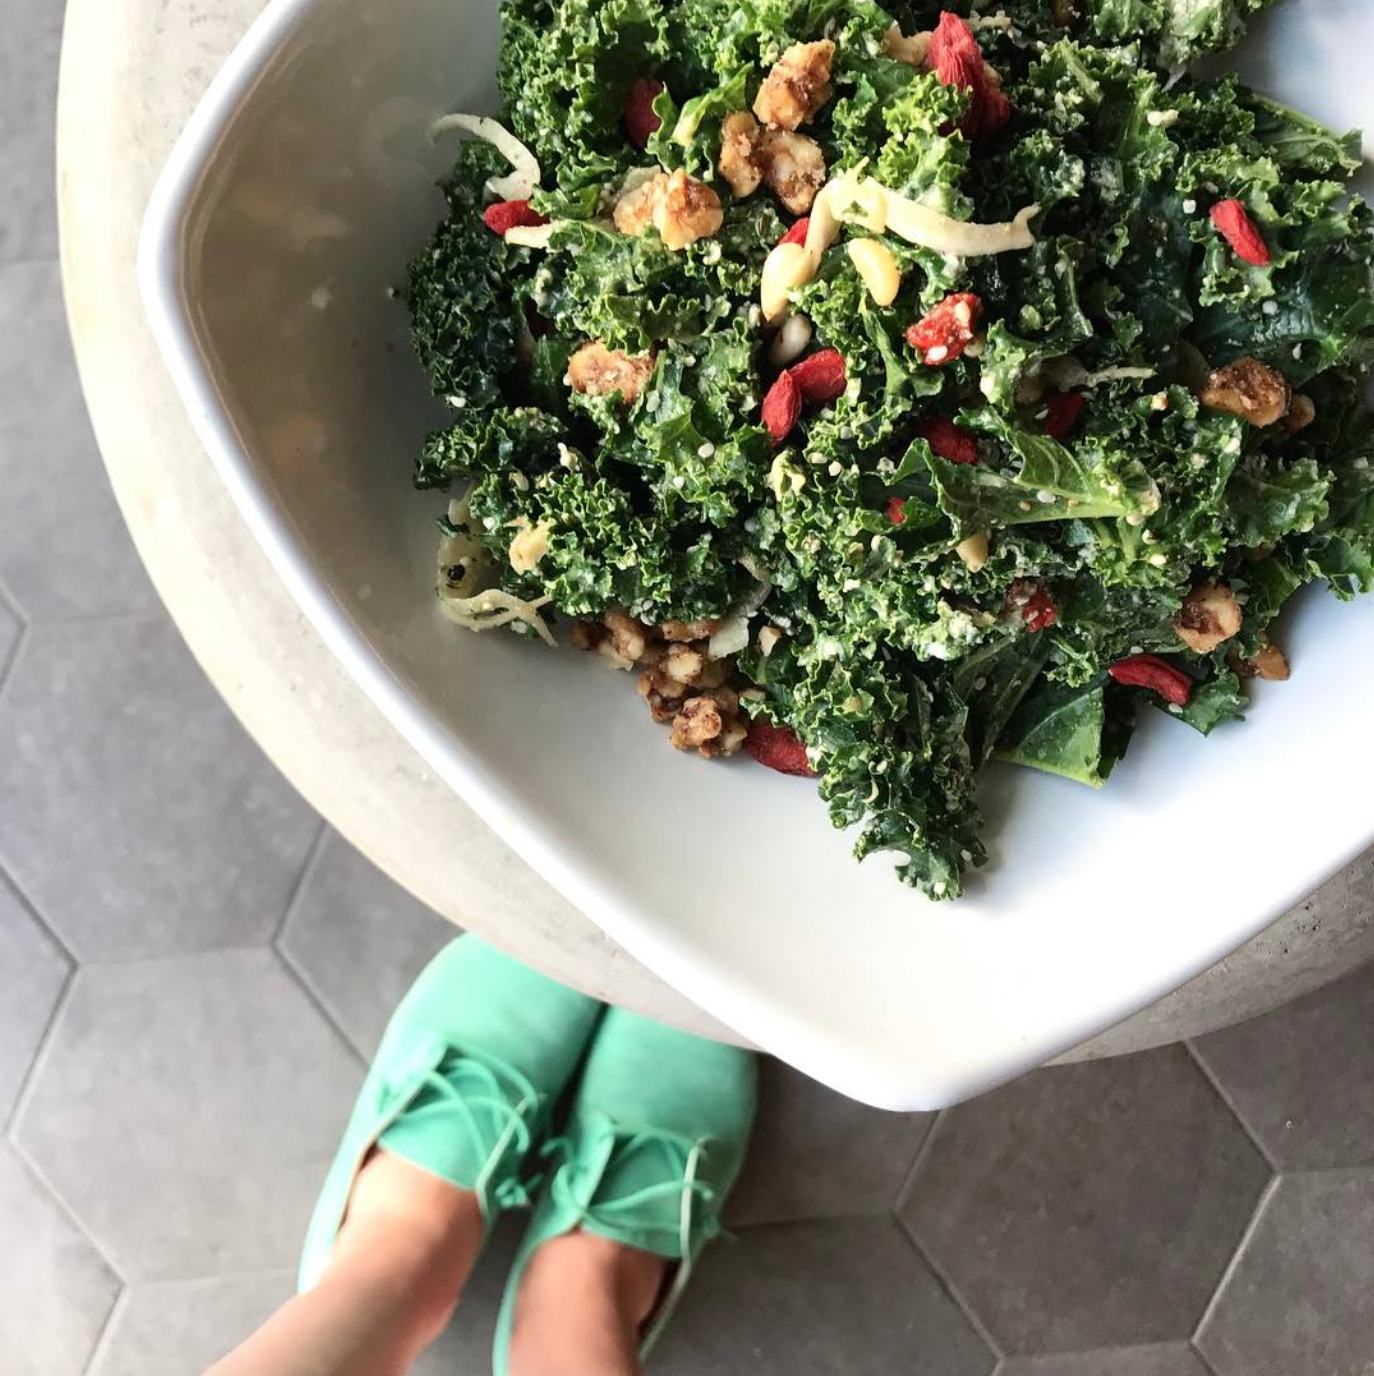 how to get rid of inflammation - kale salad from beaming